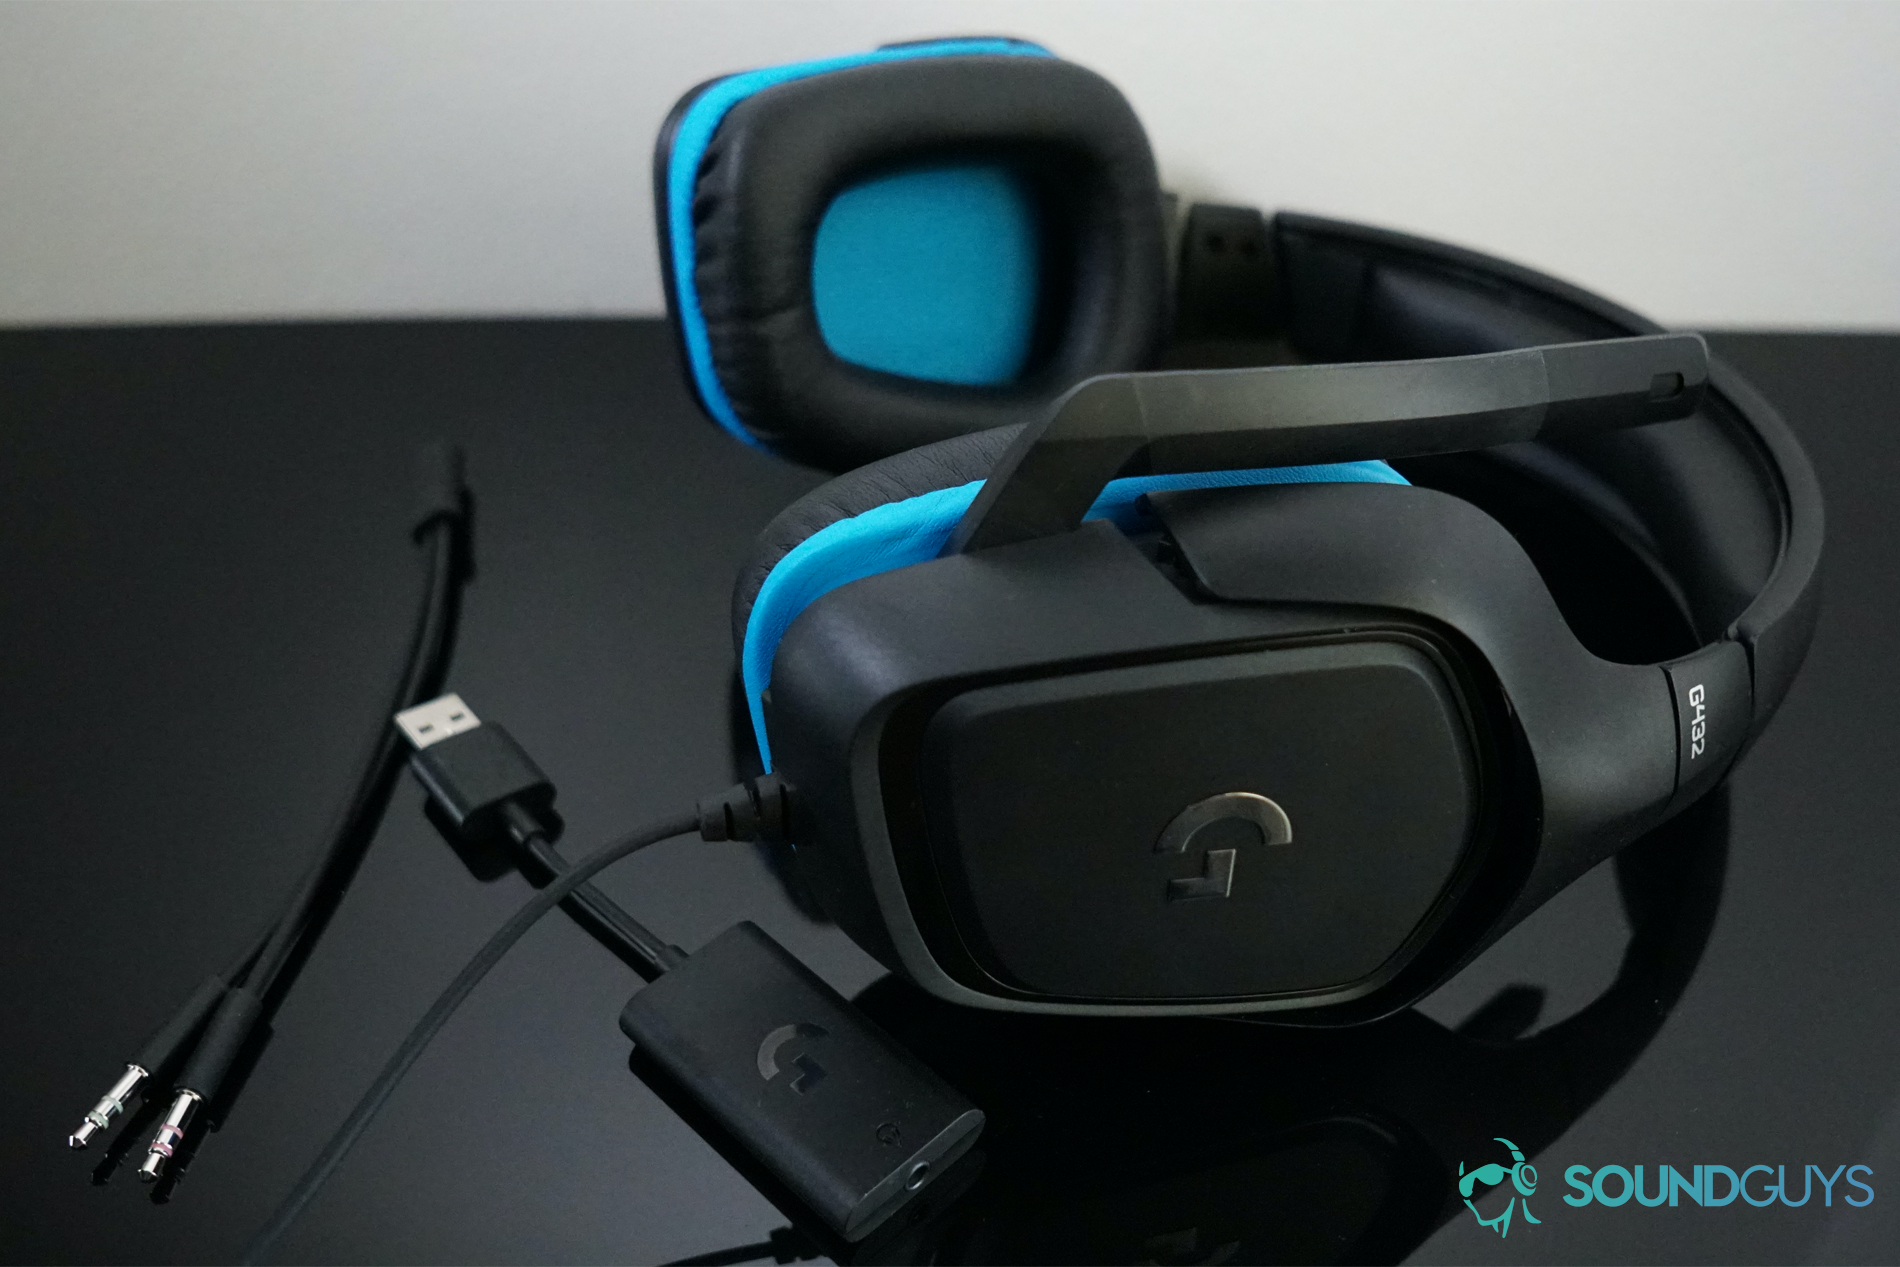 How does the 7.1 Surround Sound of the Logitech G432 work? : r/LogitechG